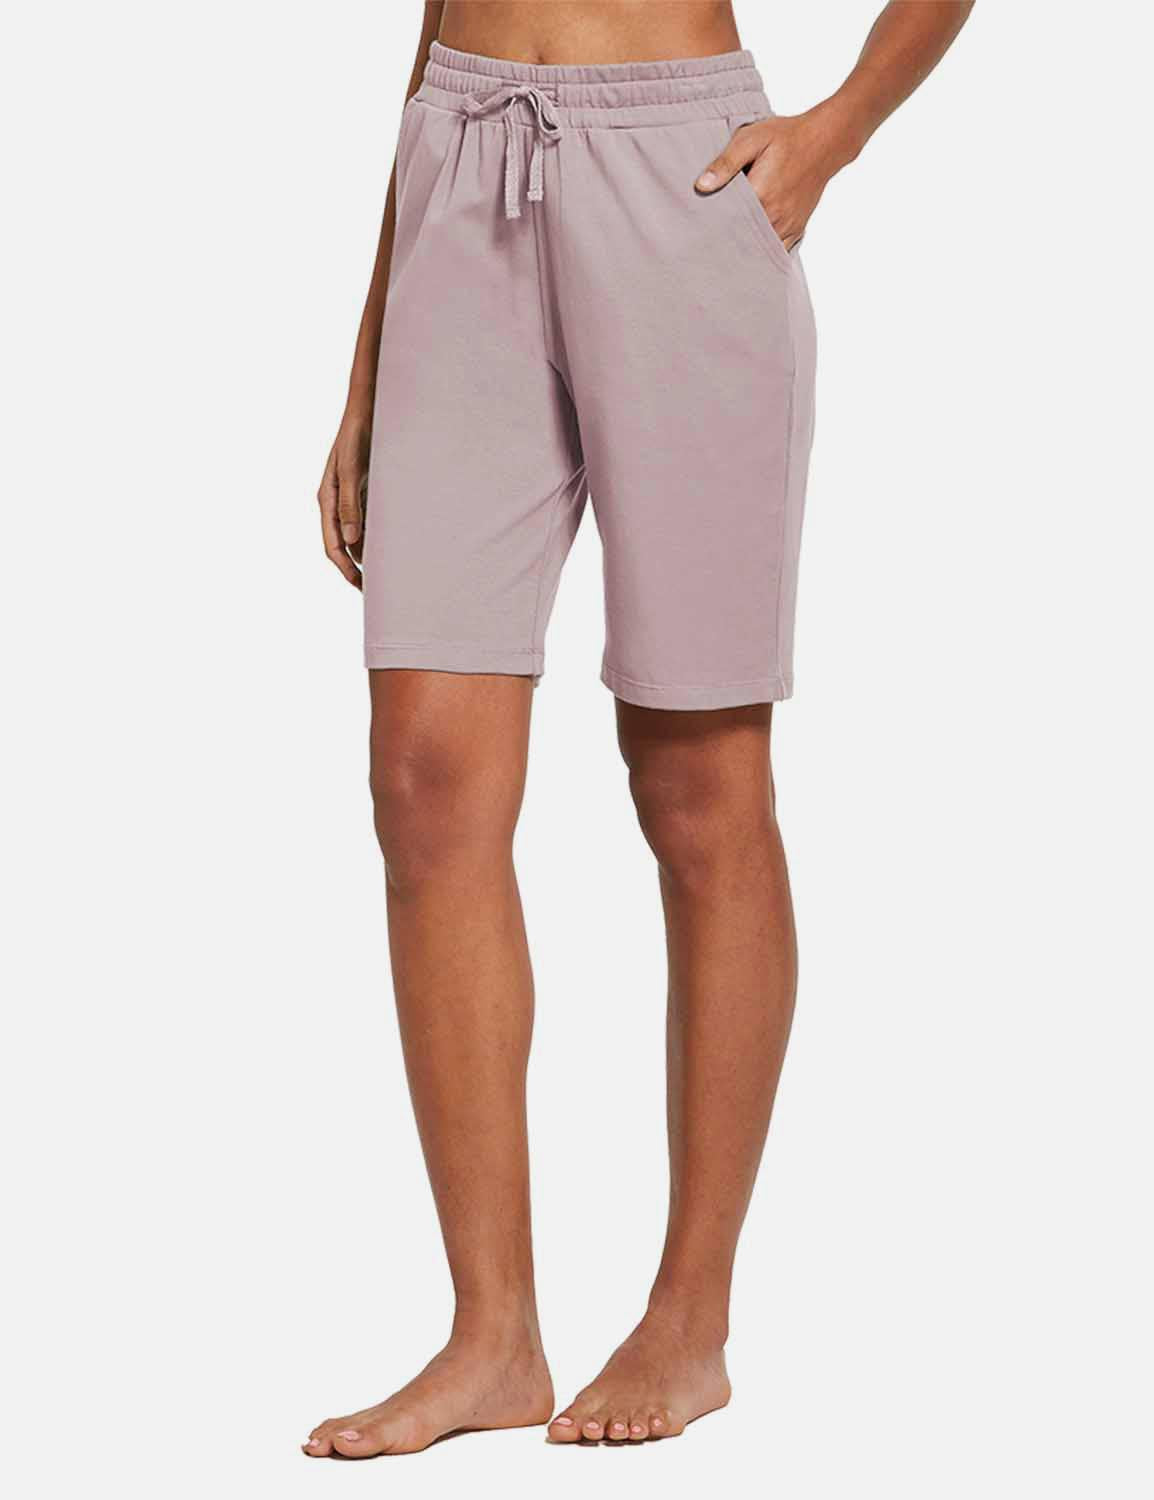 Baleaf Women's Cotton Pocketed Bermuda Jogger & Weekend Shorts abh104 Burnished Lilac Front